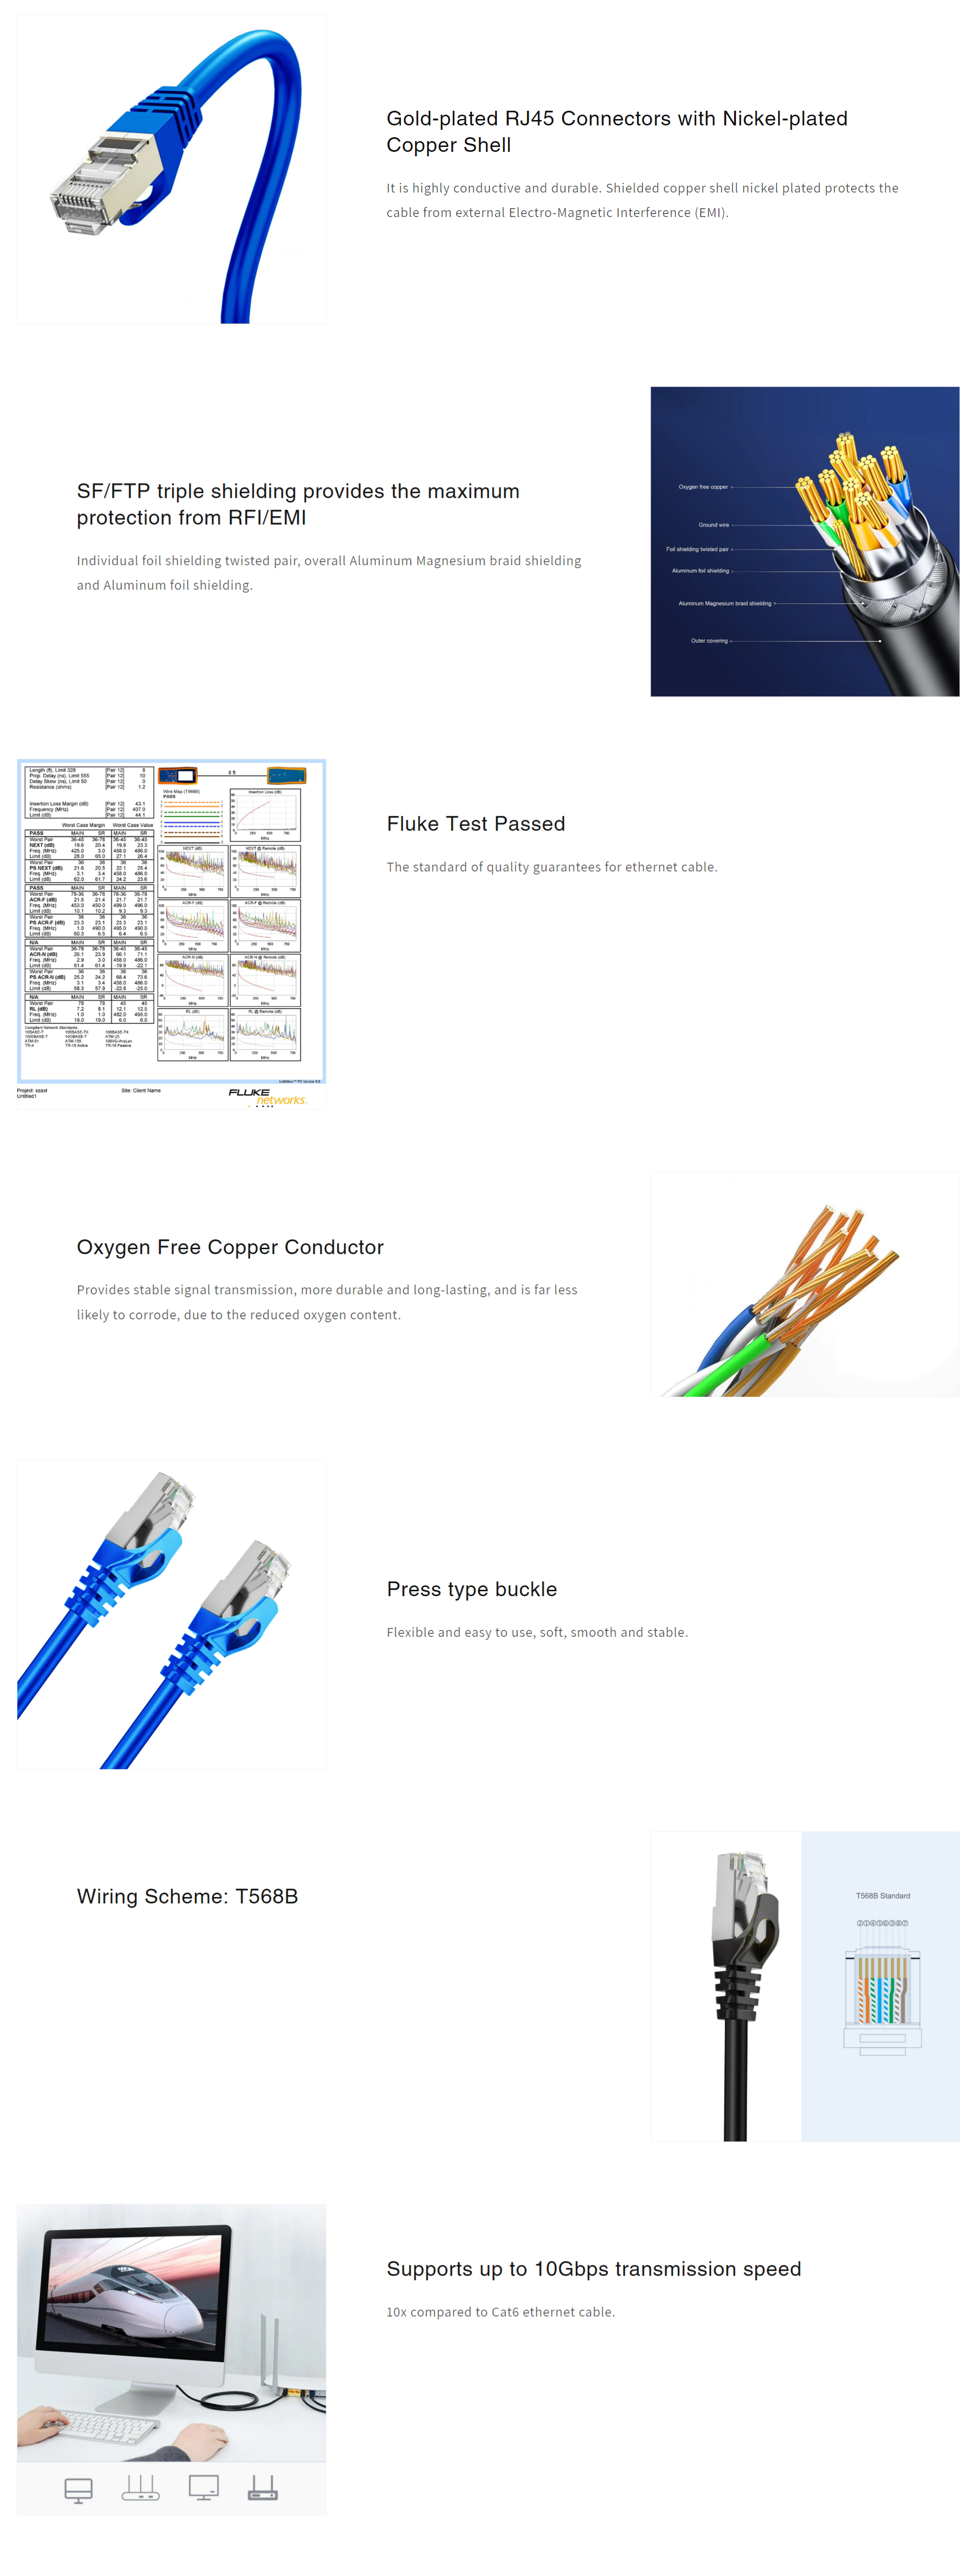 A large marketing image providing additional information about the product Cruxtec Cat7 3m 10GbE SF/FTP Triple Shielding Network Cable Blue - Additional alt info not provided